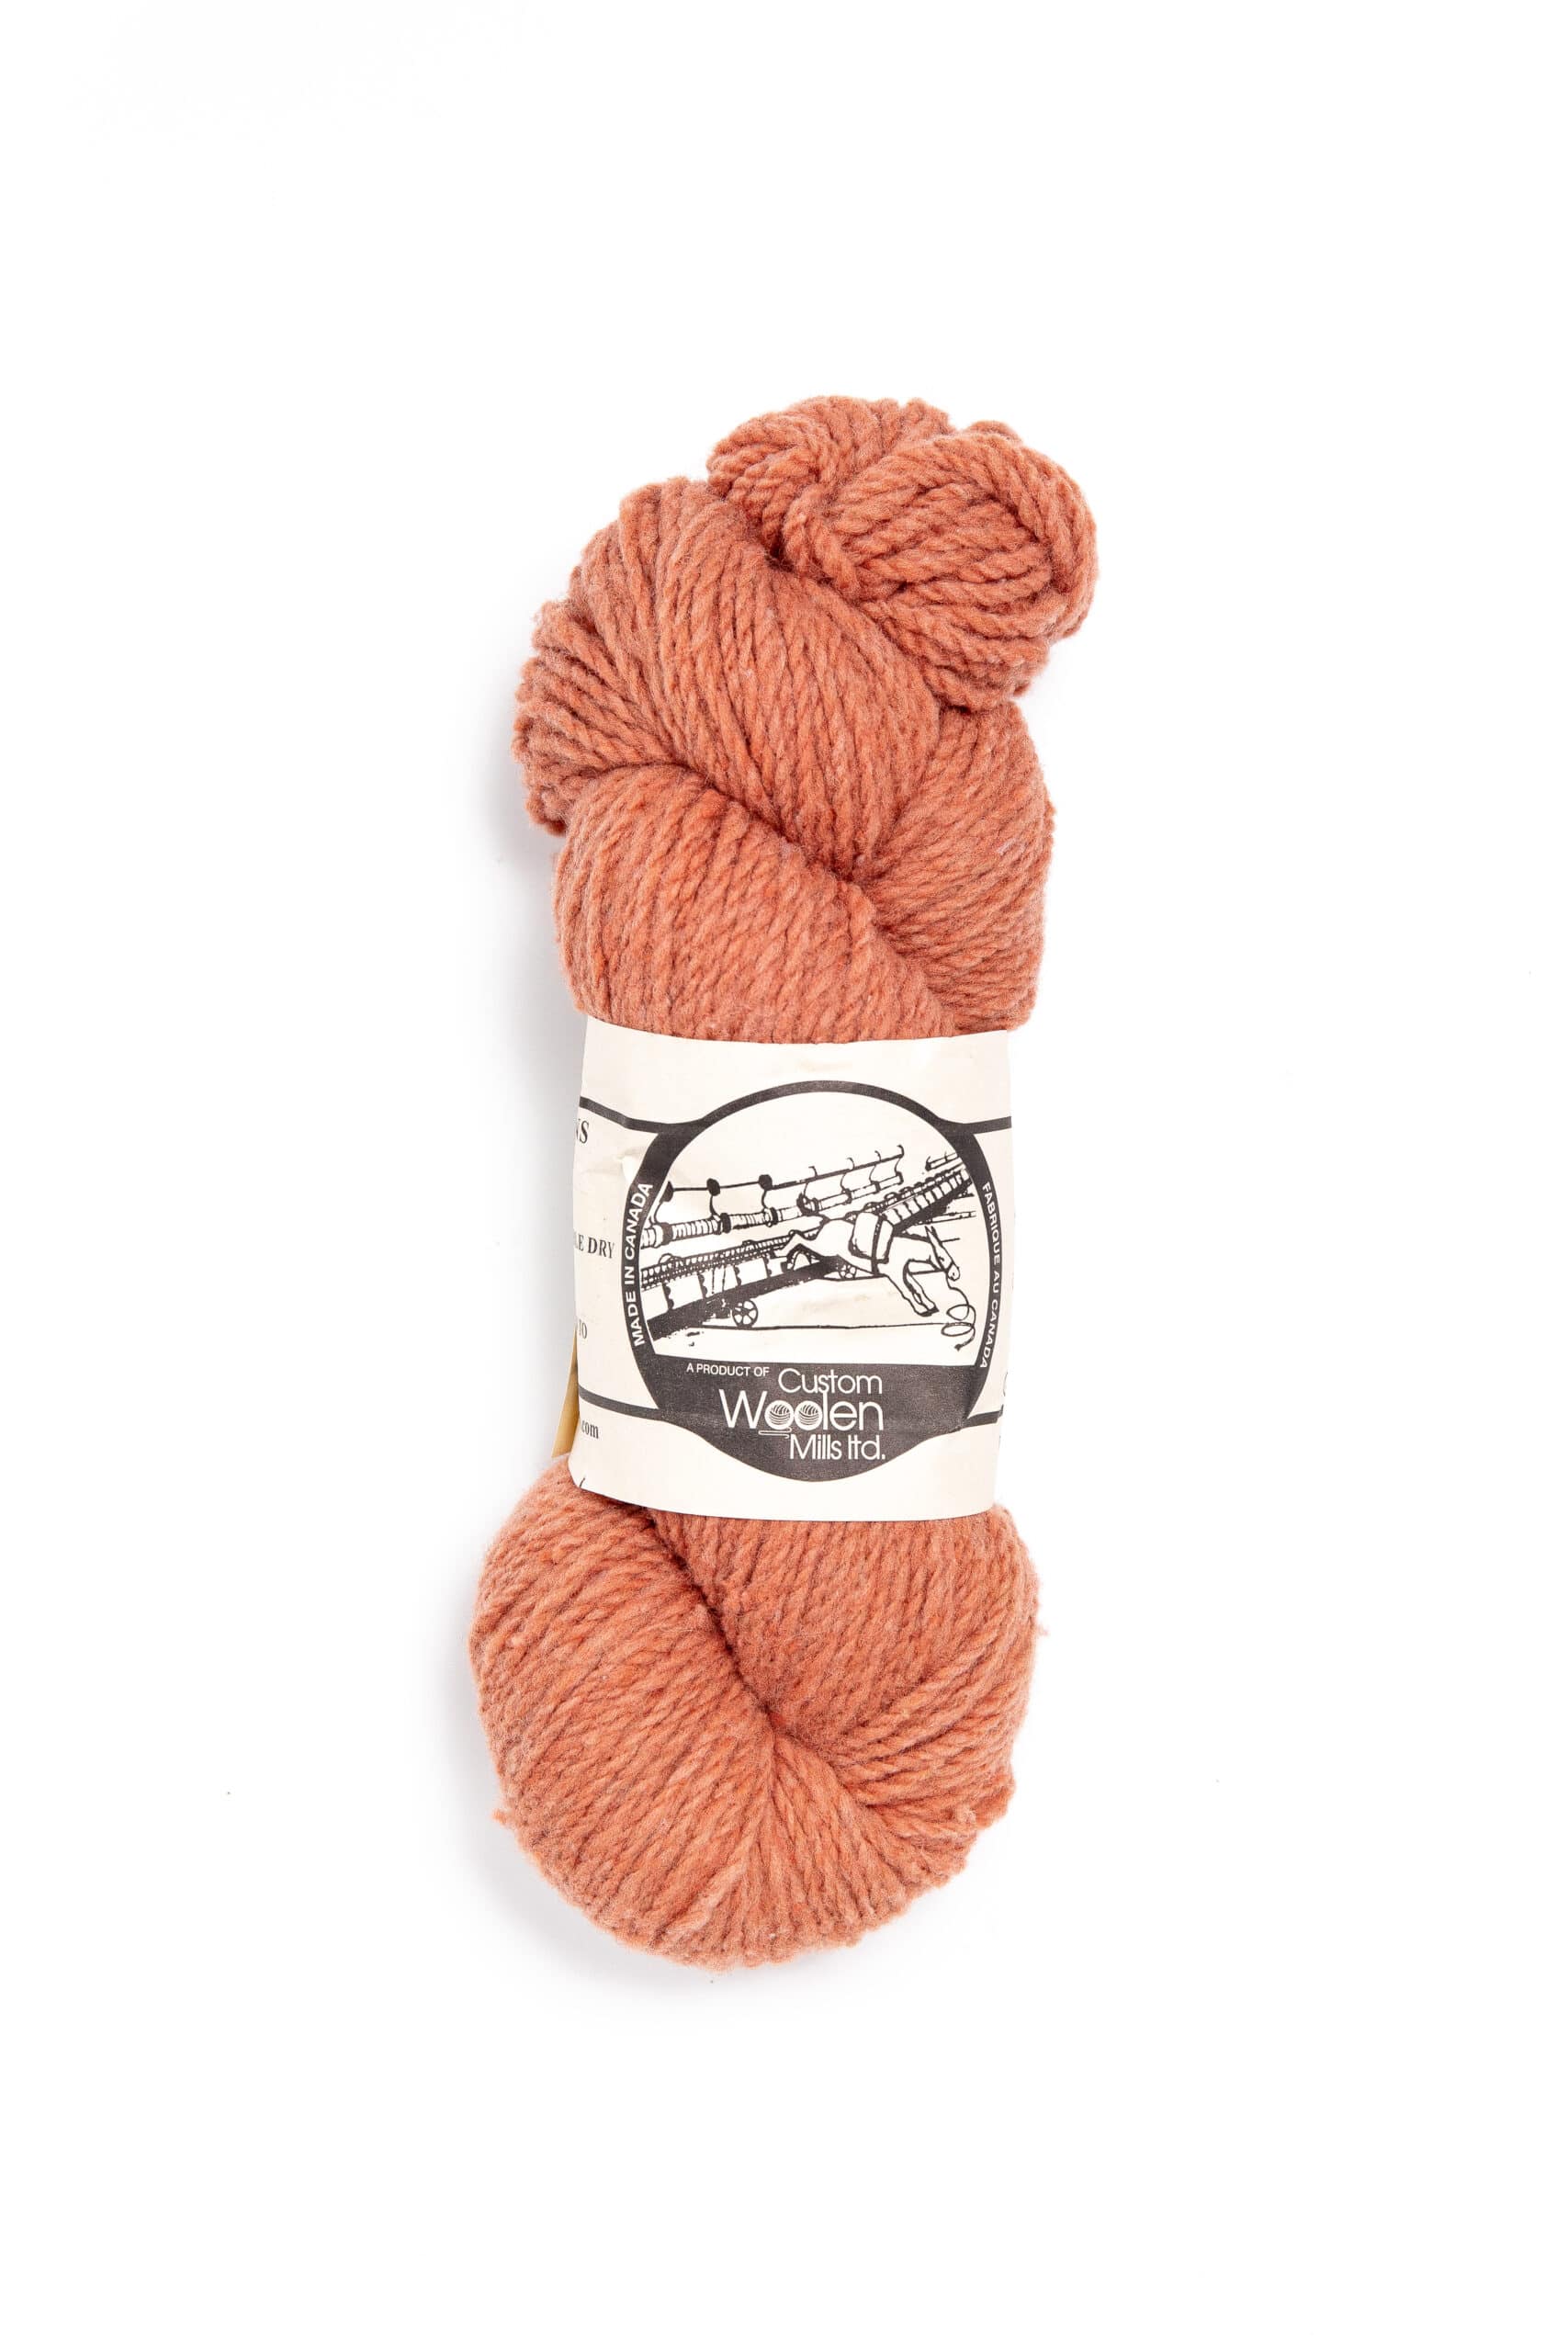 Lemieux Spinning  Online Store of Wool Yarns for Knitting and Weaving